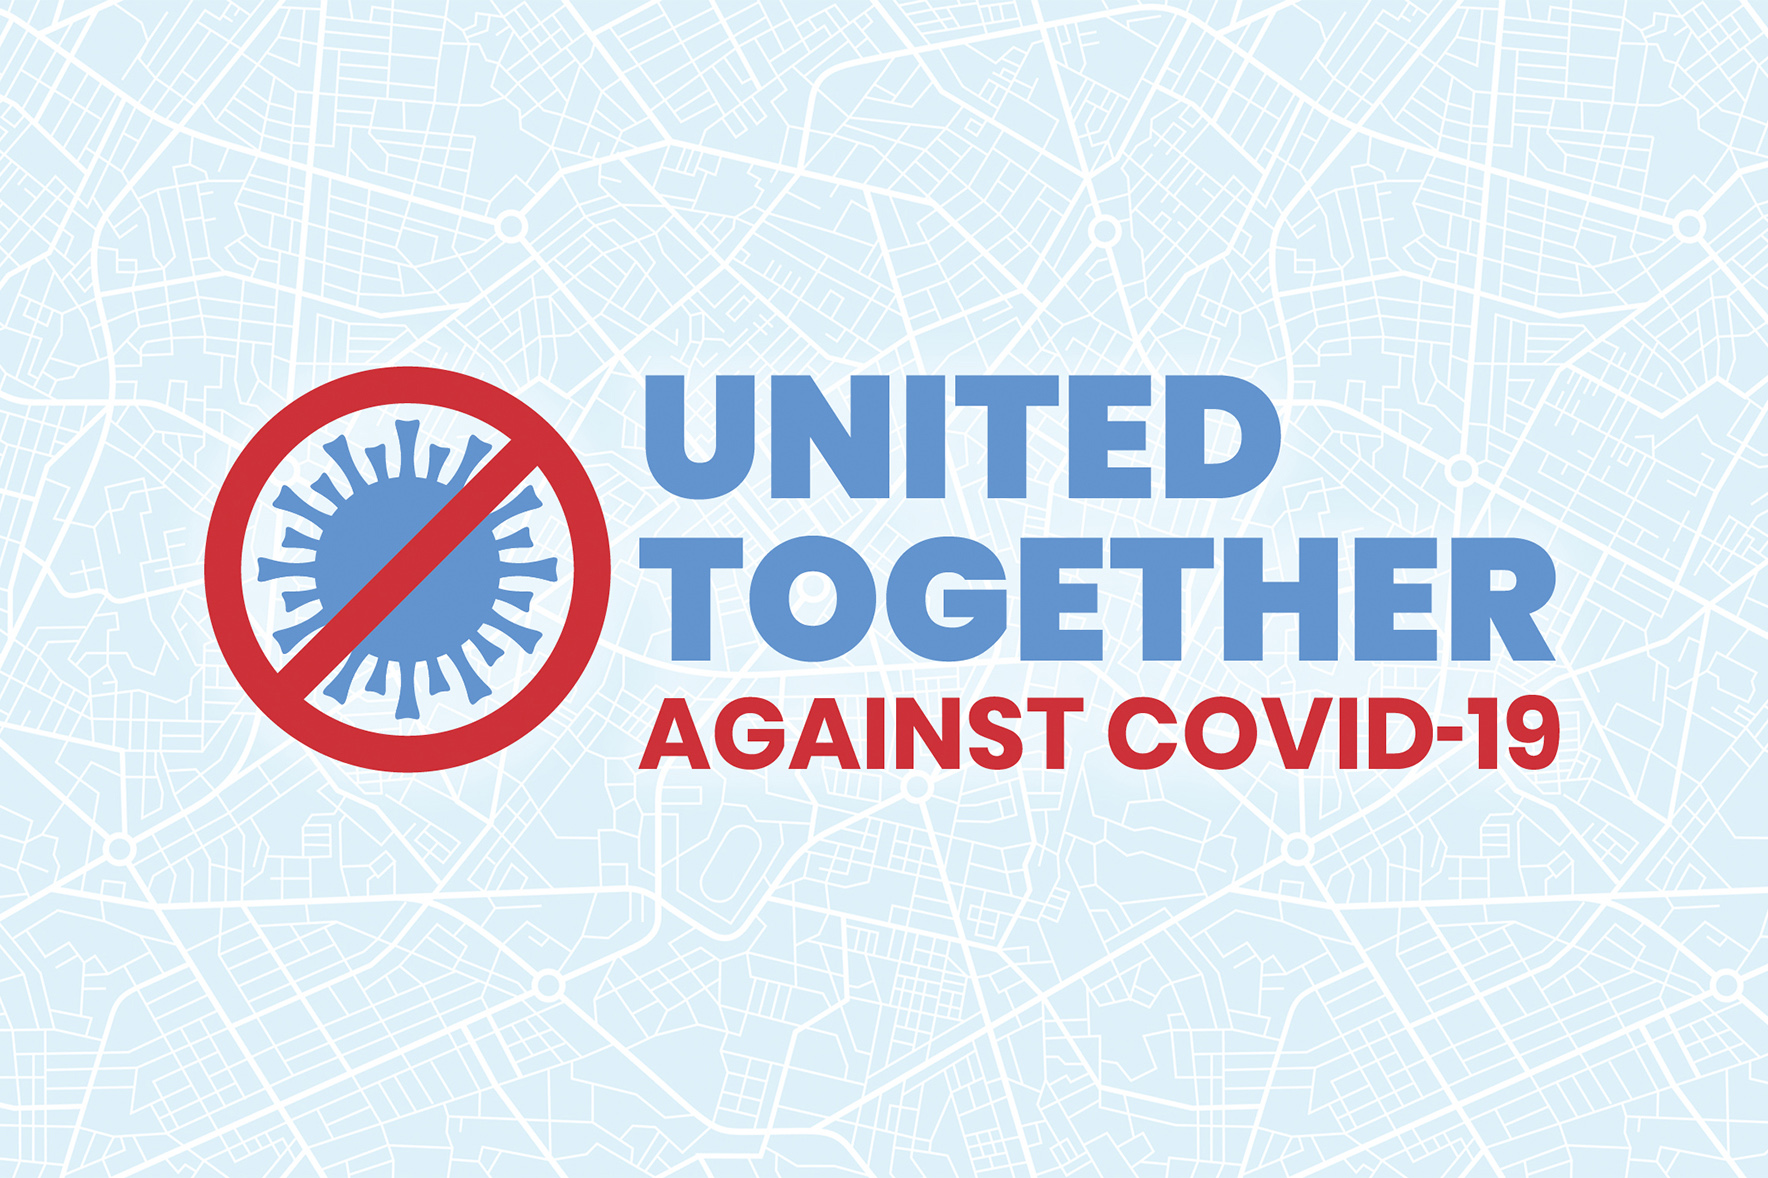 “United Together Against COVID-19”